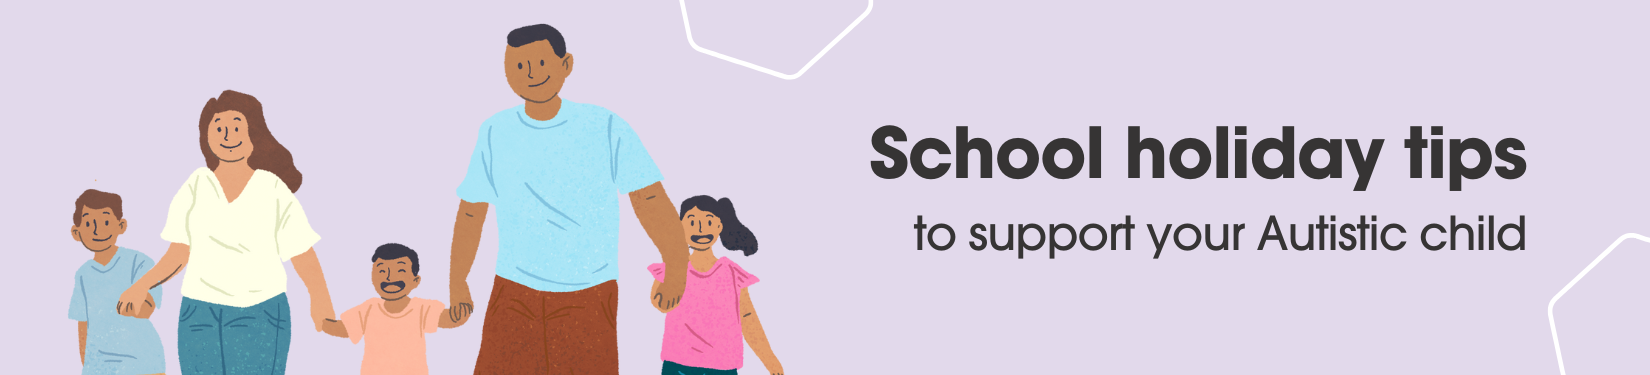 School holiday tips to support your Autistic child